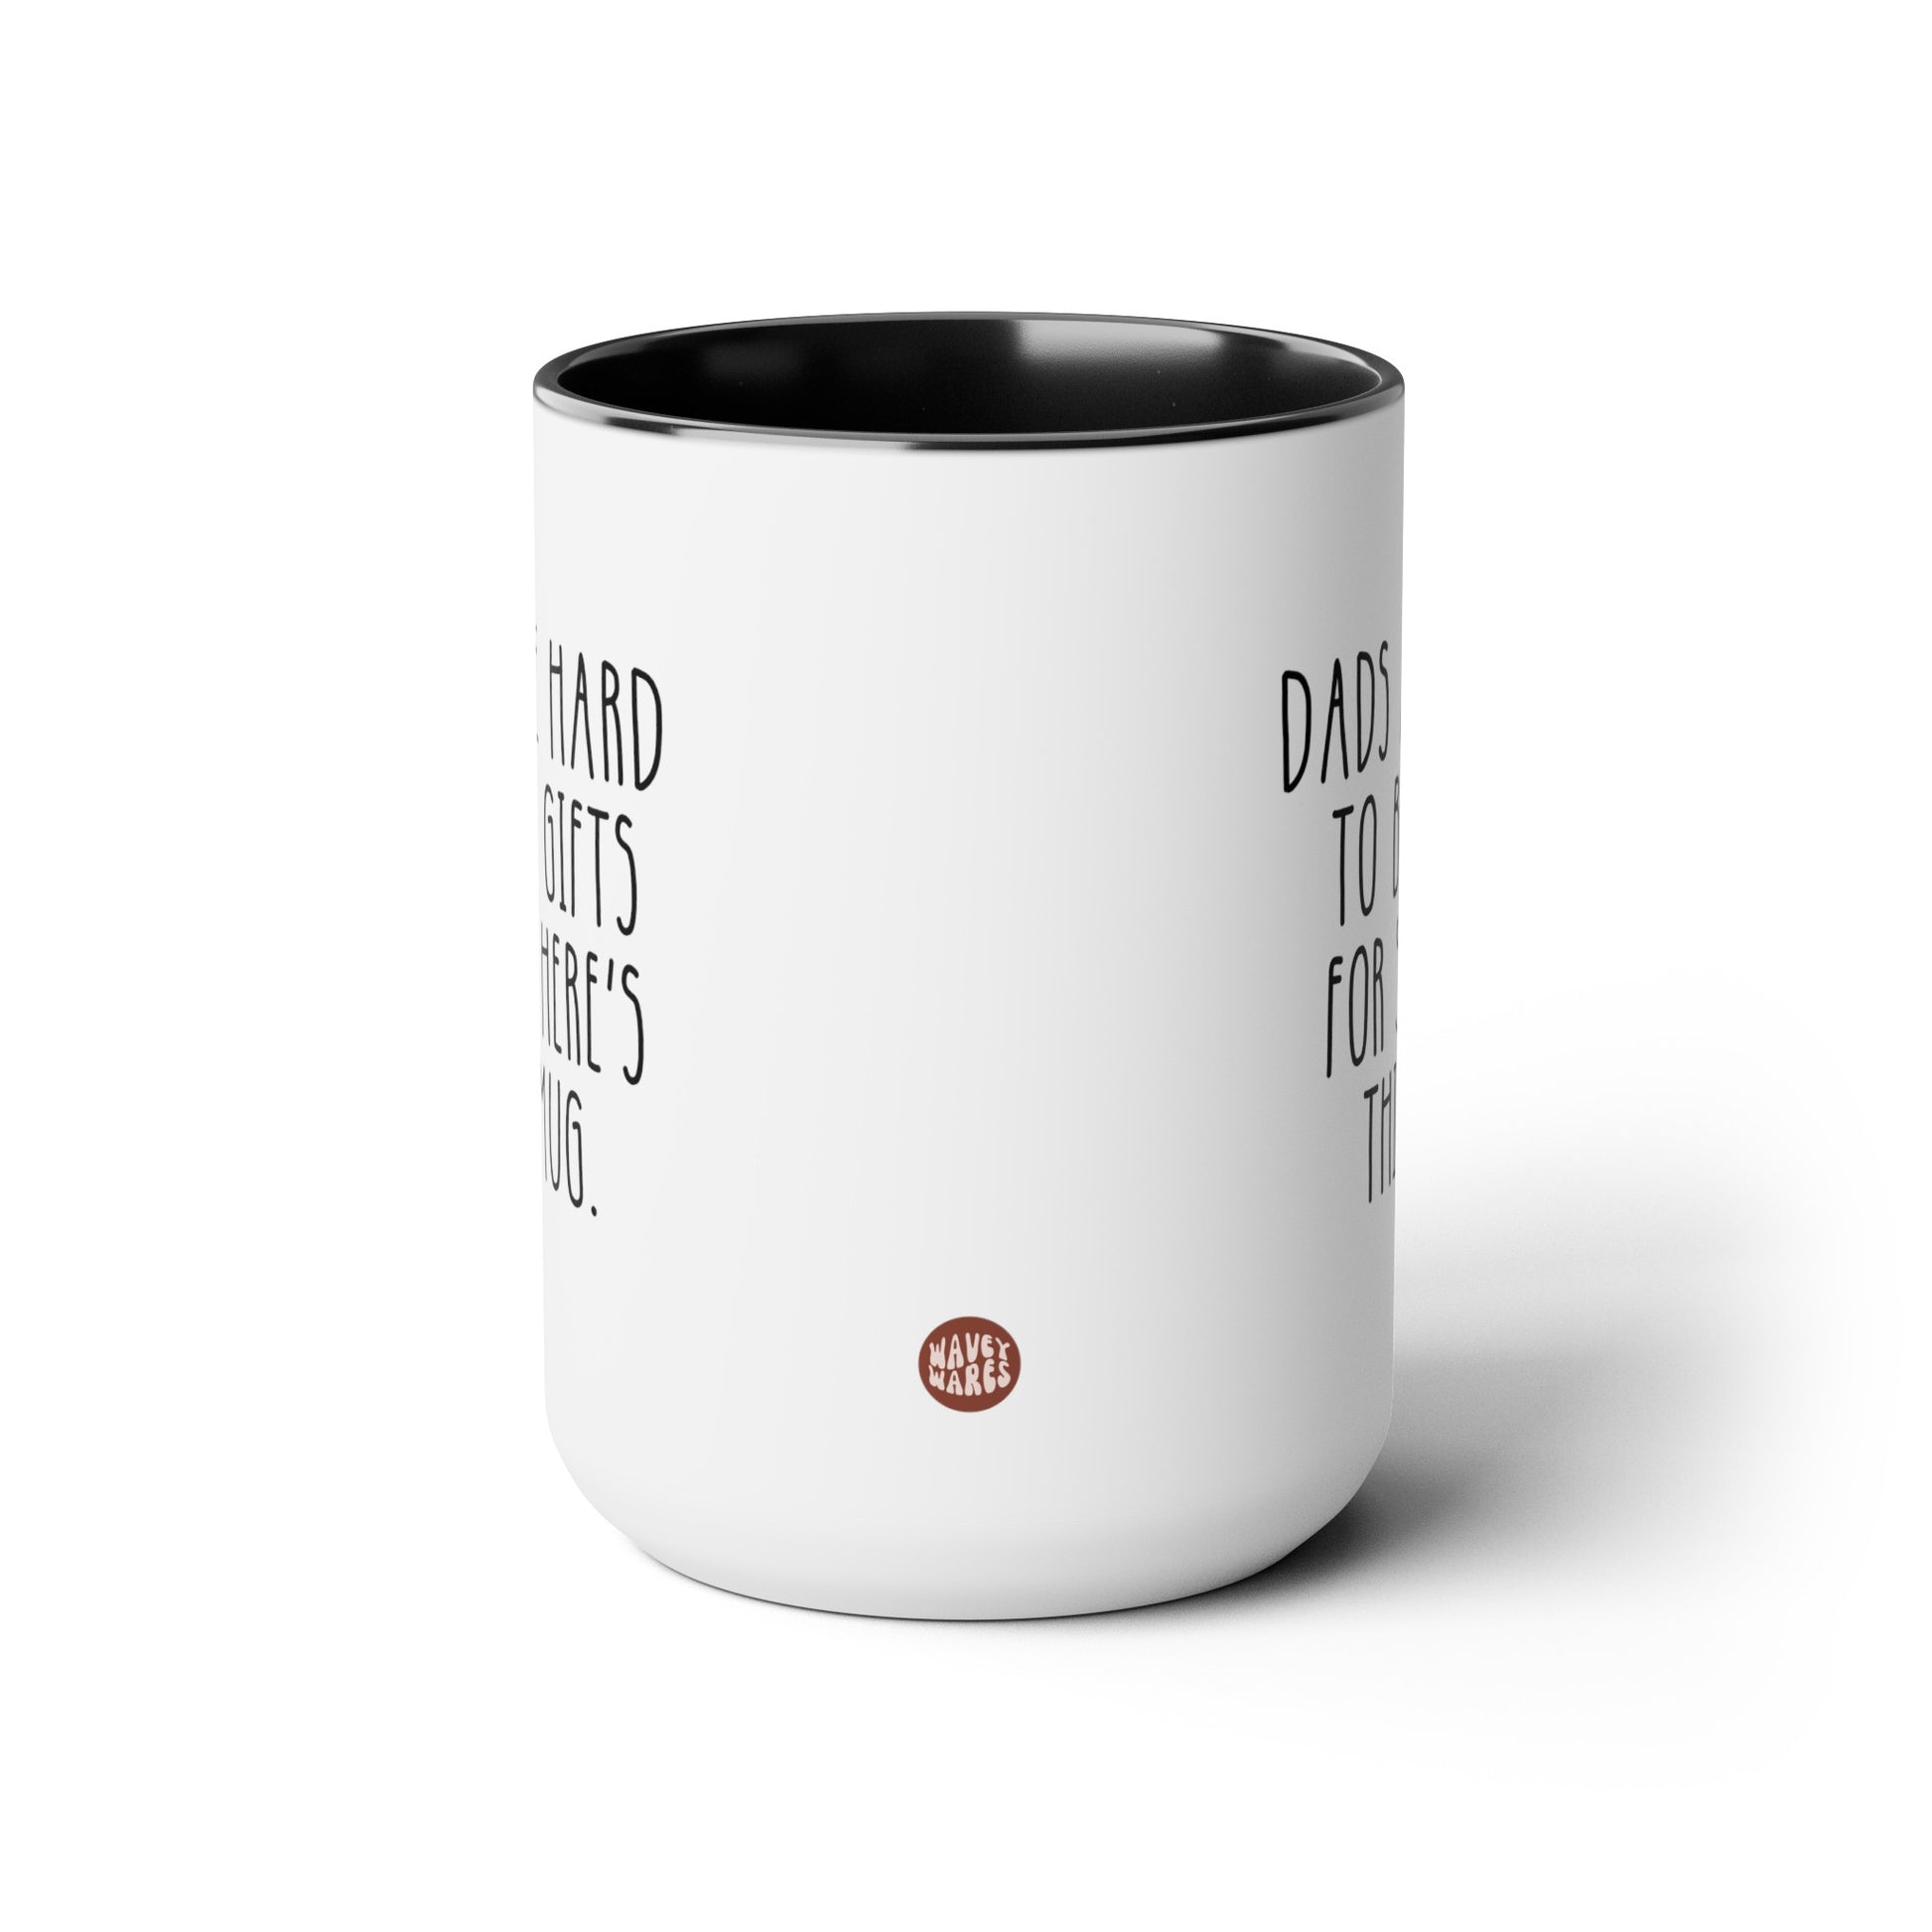 Dads Are Hard To Buy Gifts For So Here's This Mug 15oz white with black accent funny large coffee mug gift for father's day dad stepdad cute waveywares wavey wares wavywares wavy wares side